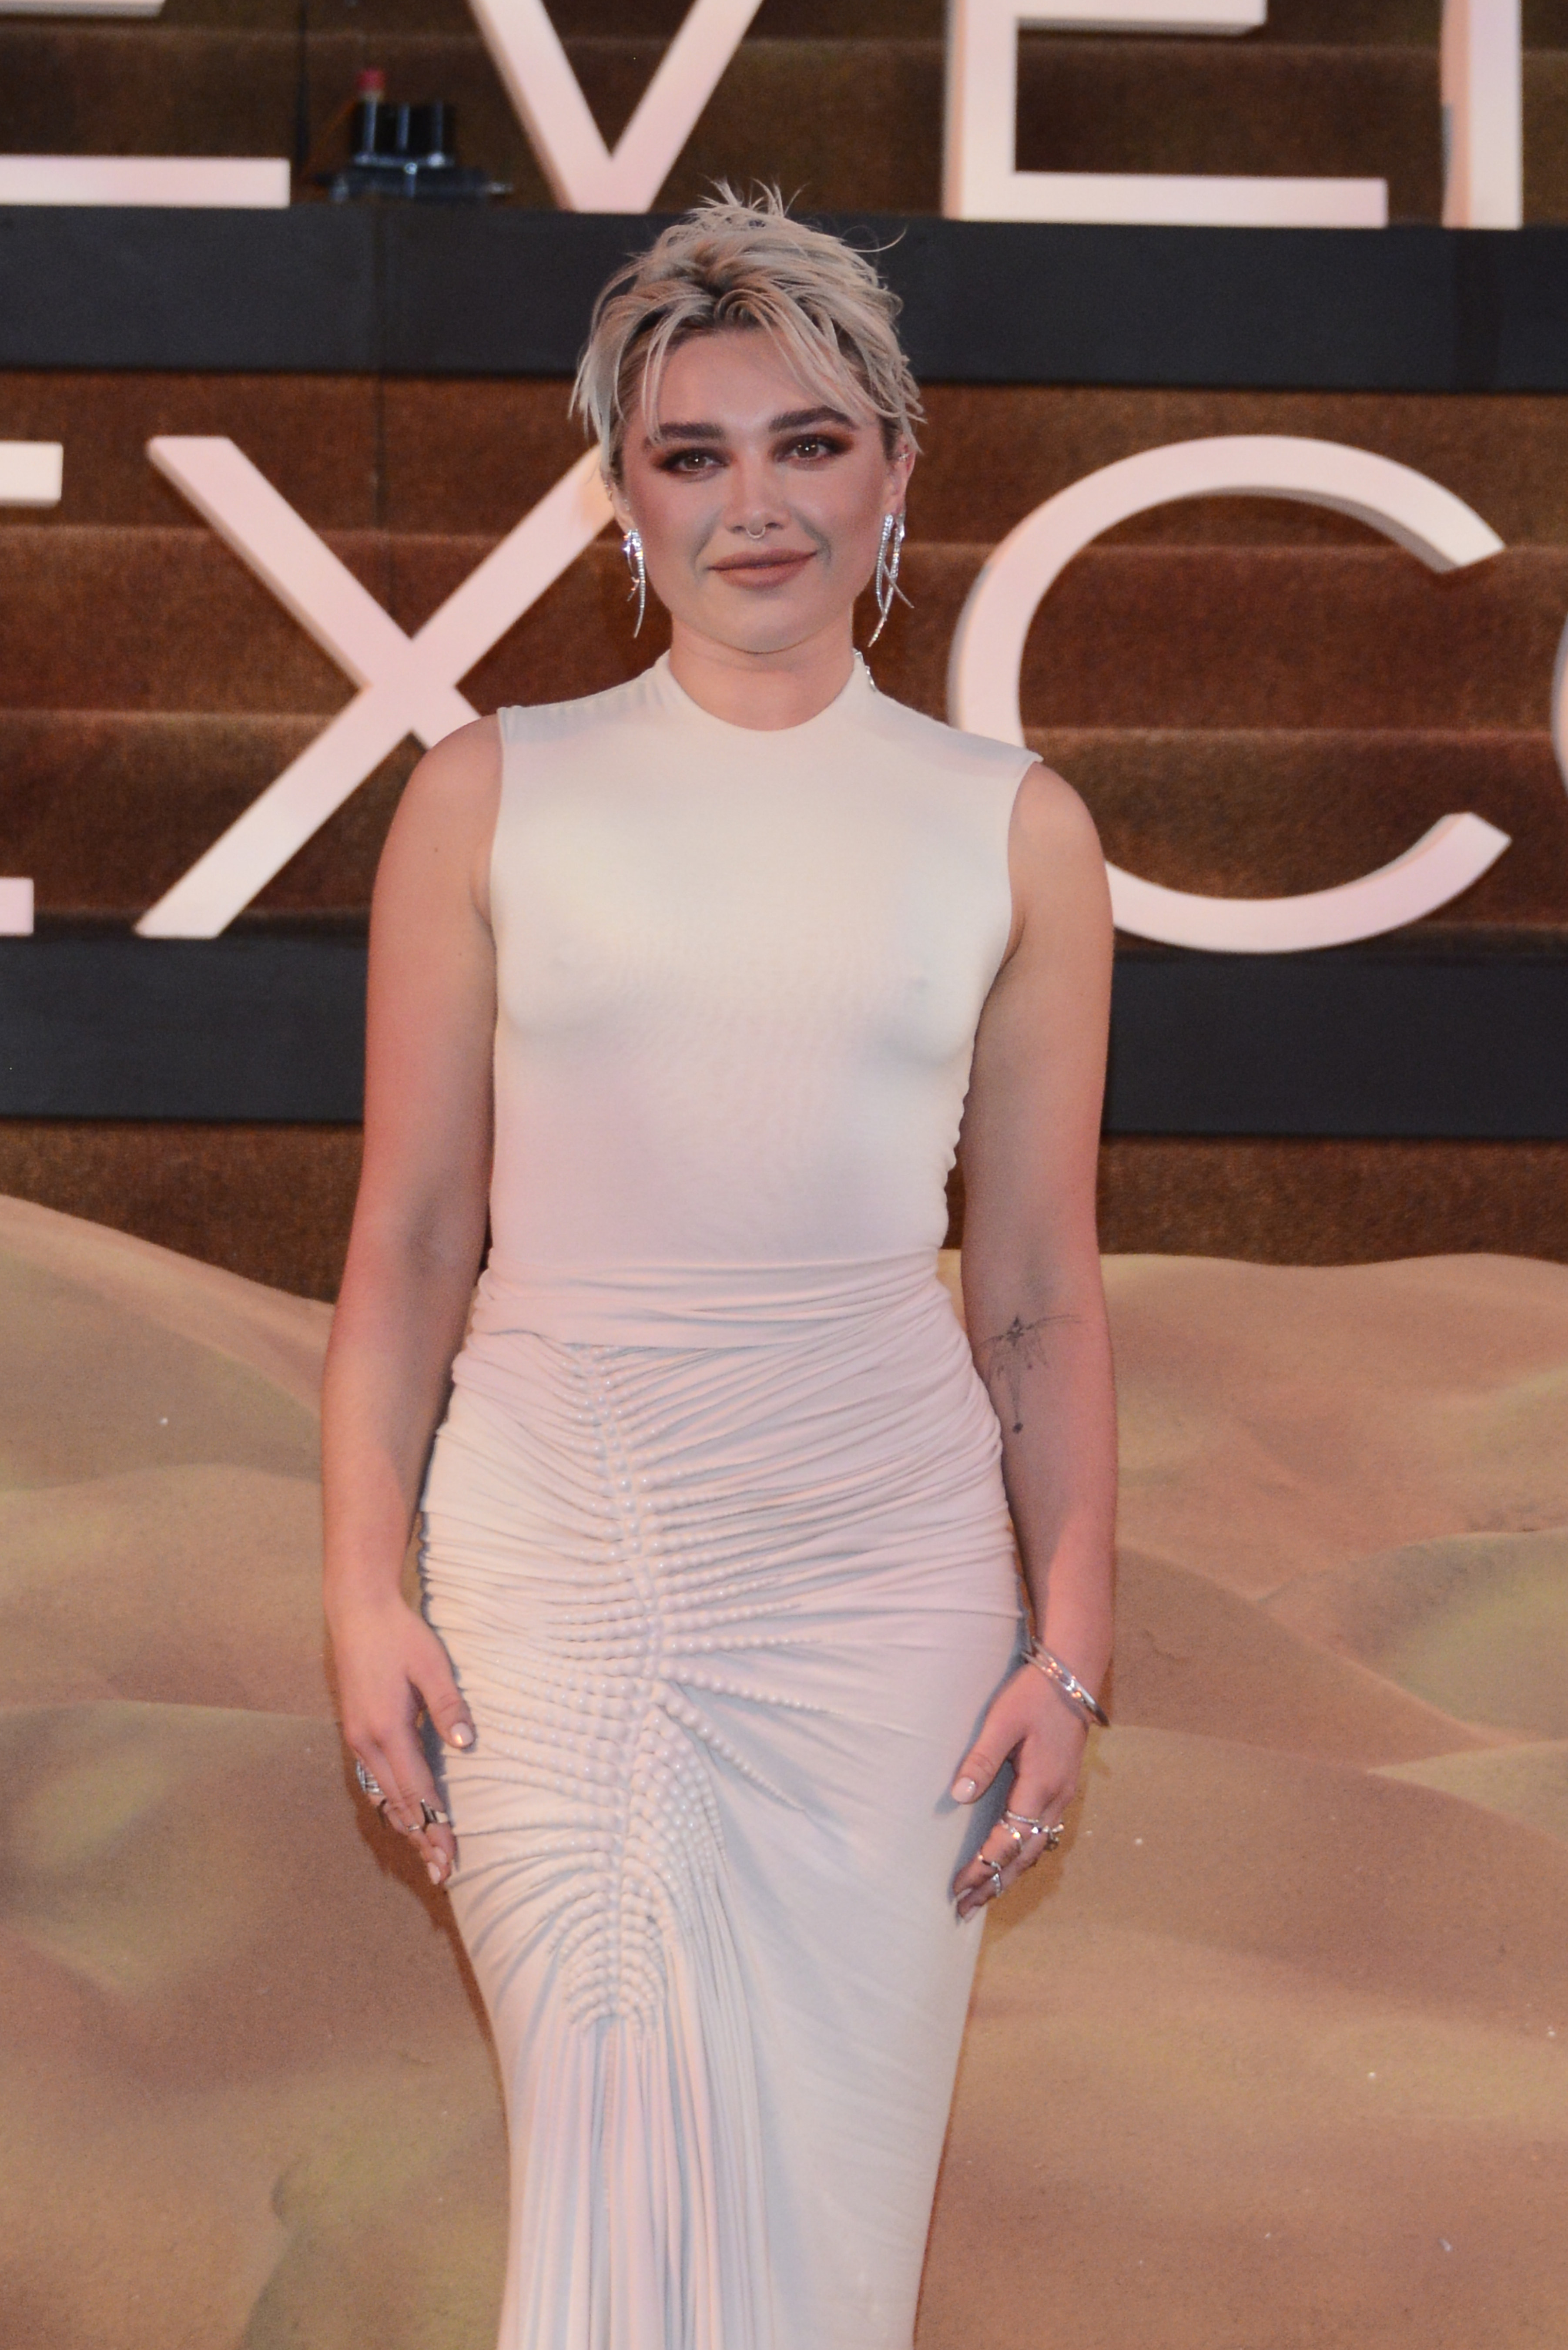 Fans online called her out for copying Florence Pugh